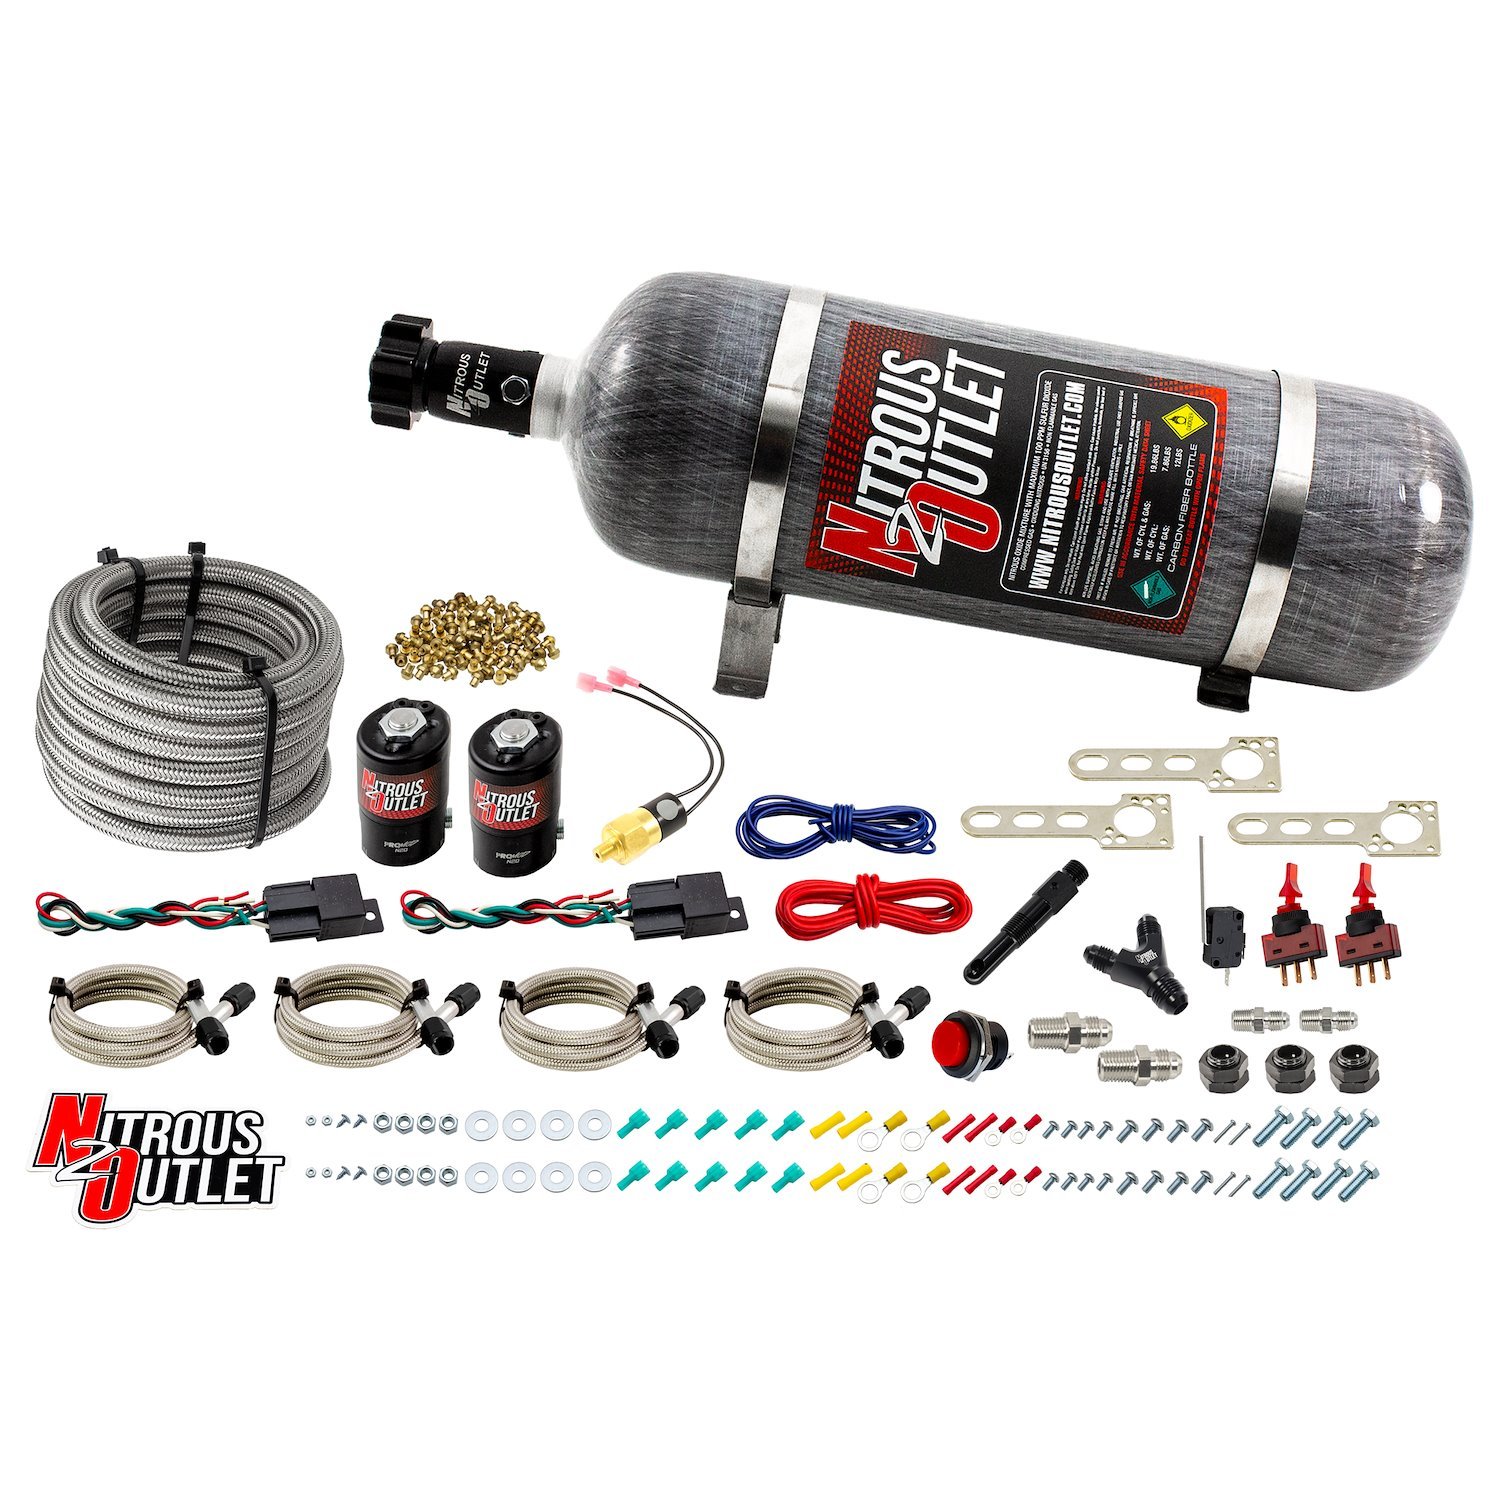 00-10251-12 Universal Diesel Dual-Stage Dry Single-Nozzle System, 35-200HP, 12lb Bottle